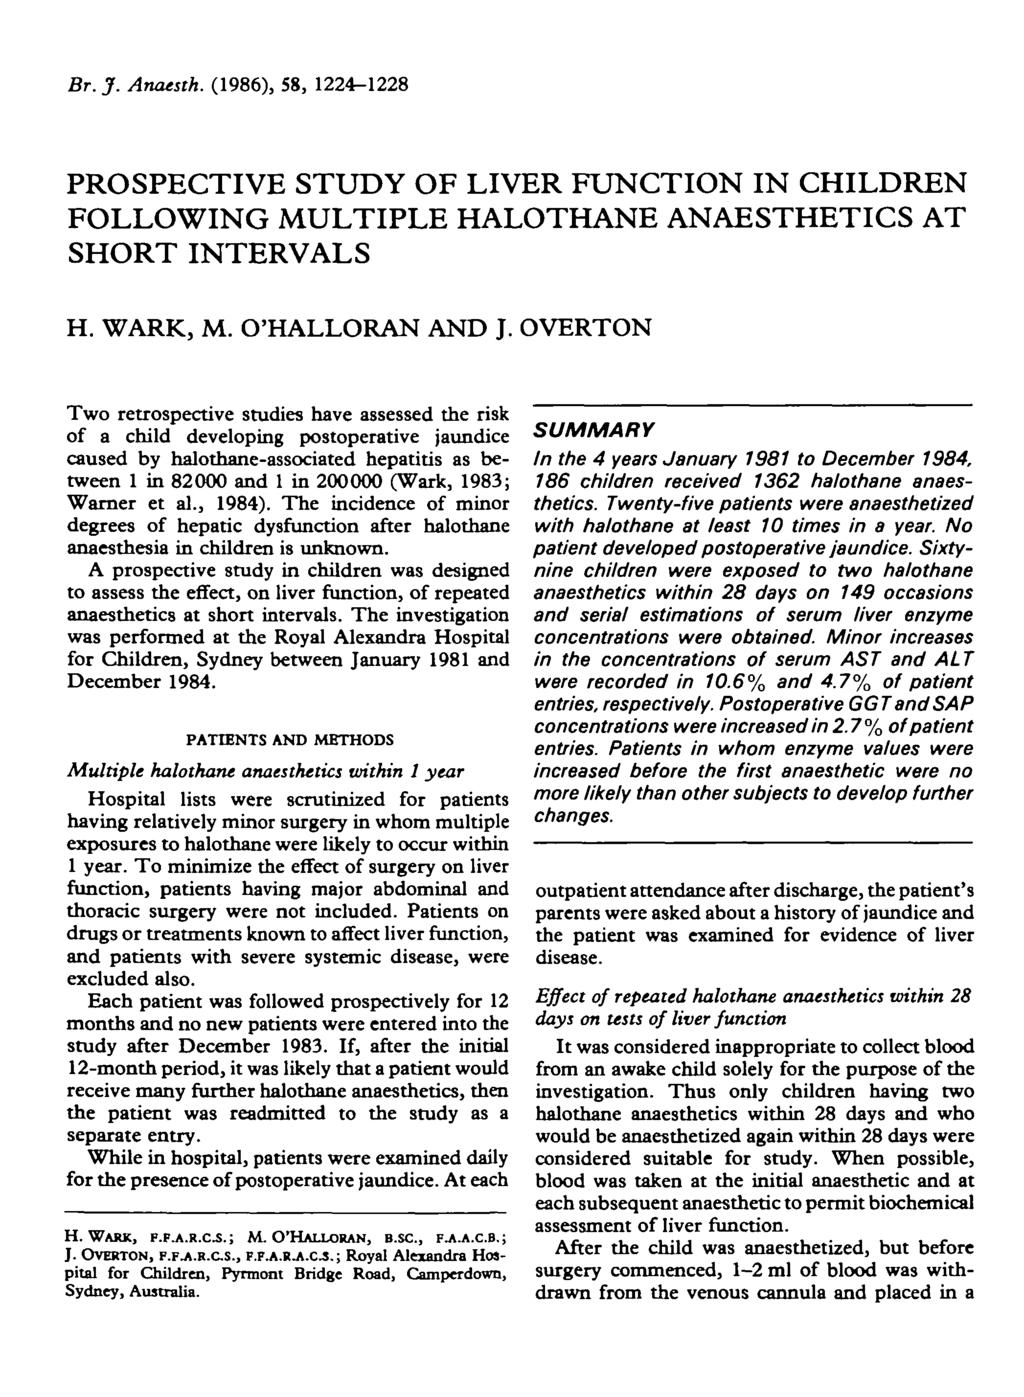 Br. J. Anaesth. (86), 8, -8 PROSPECTIVE STUDY OF LIVER FUNCTION IN CHILDREN FOLLOWING MULTIPLE HALOTHANE ANAESTHETICS AT SHORT INTERVALS H. WARK, M. O'HALLORAN AND J.